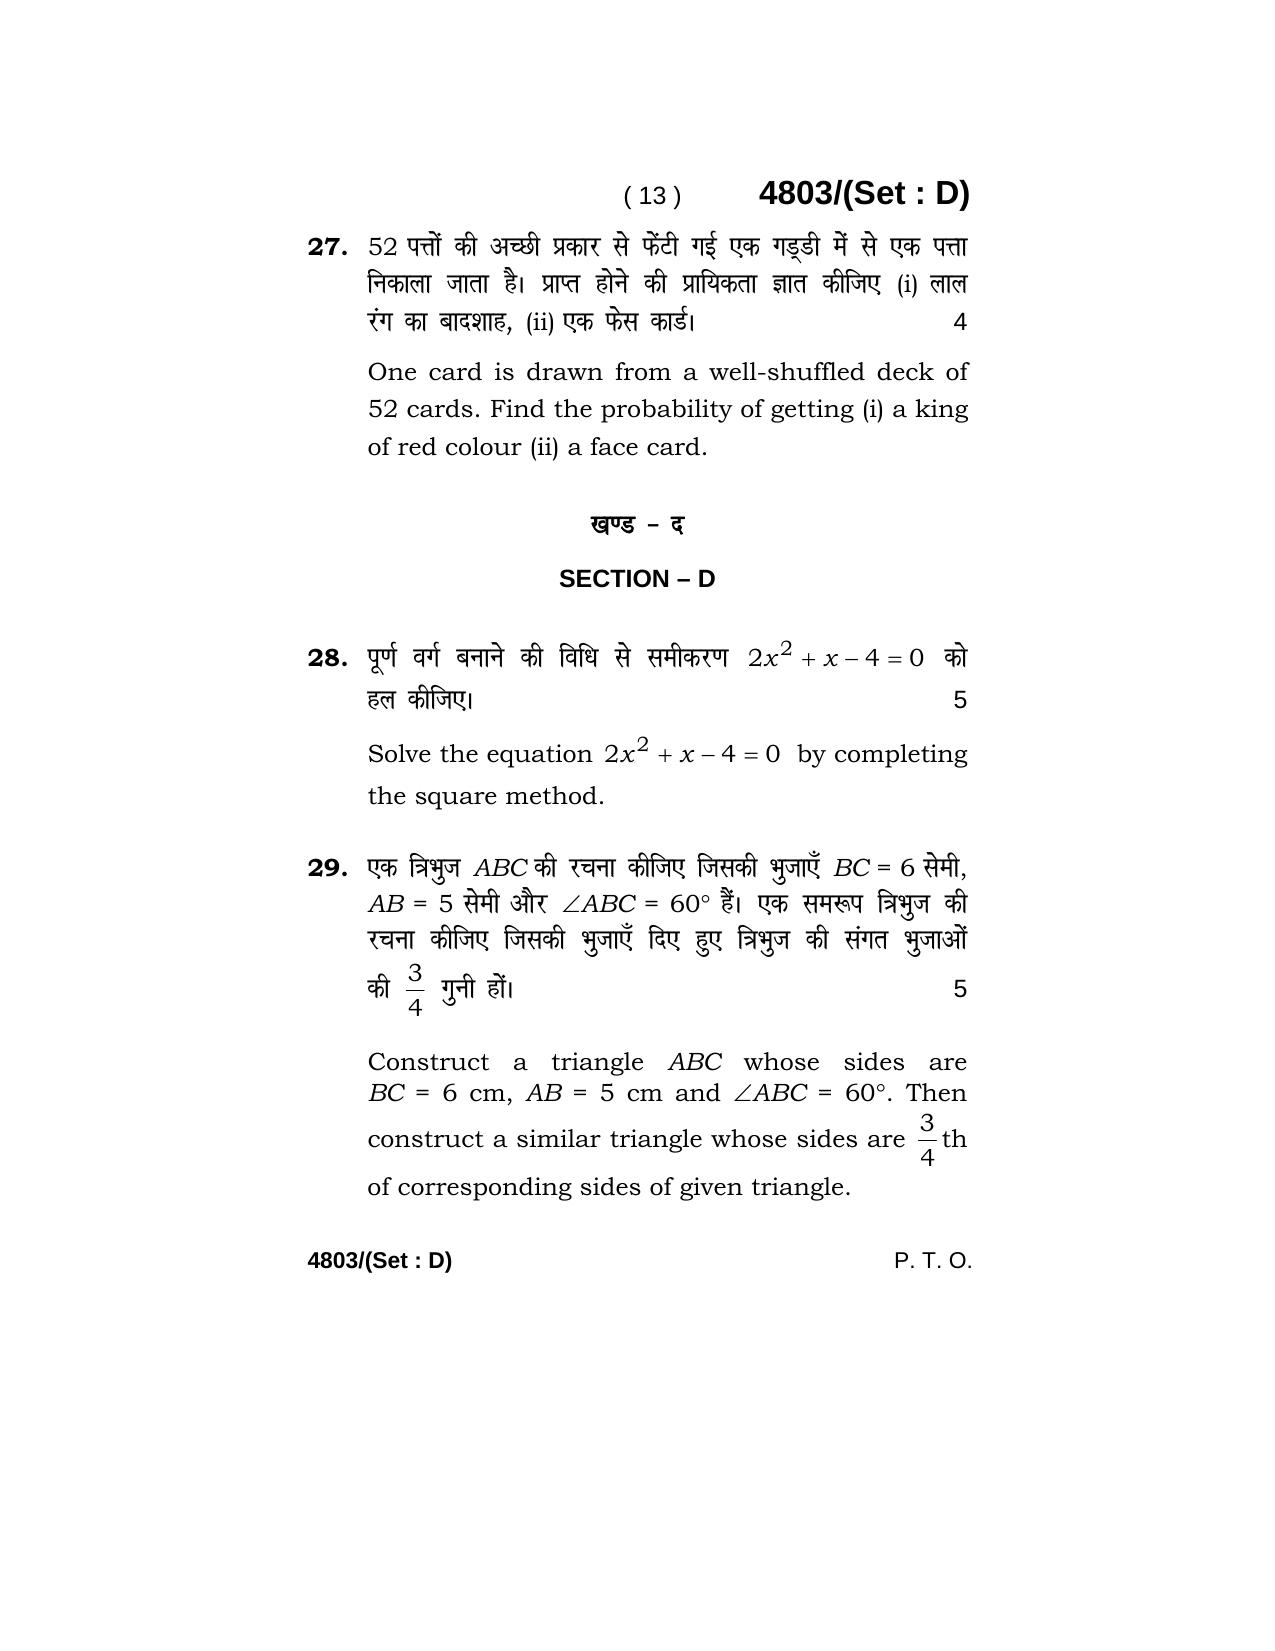 Haryana Board HBSE Class 10 Mathematics 2020 Question Paper - Page 61